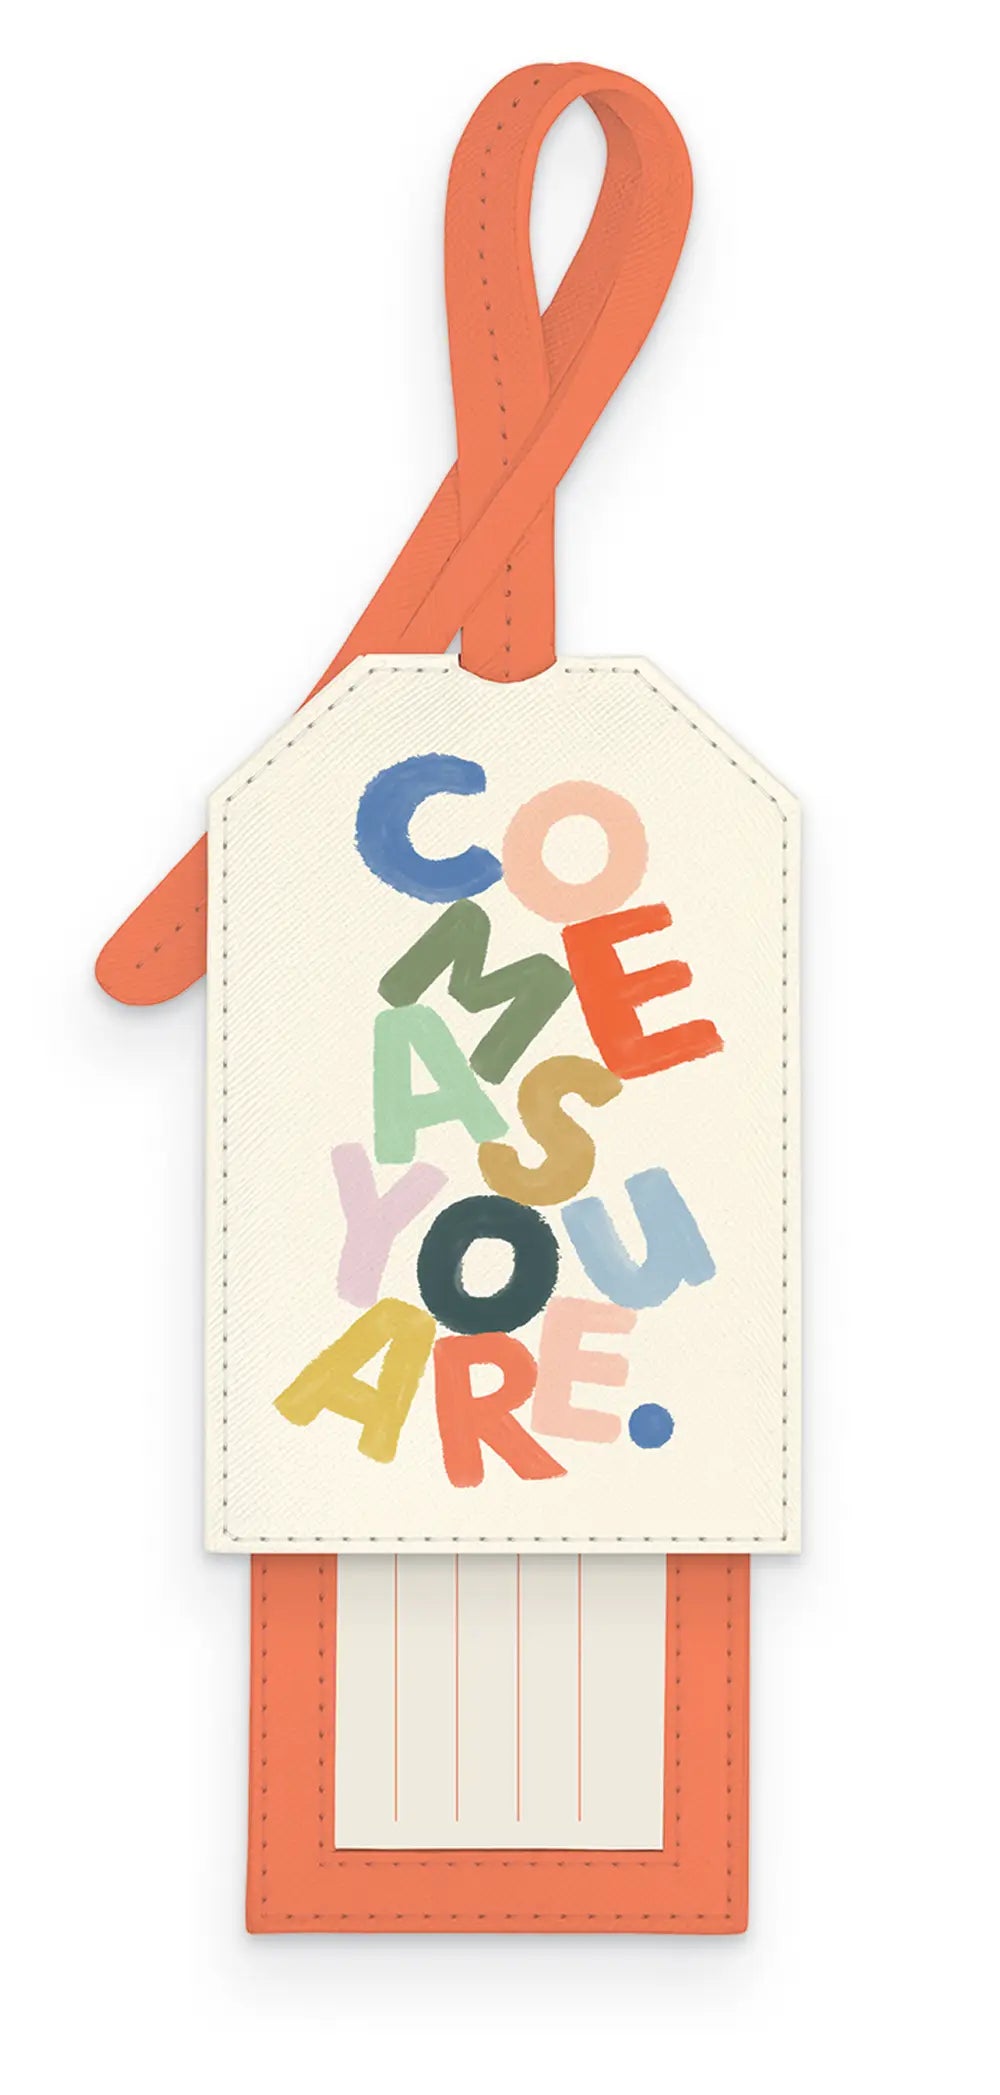 Come As You Are Slide-Out Luggage Tag